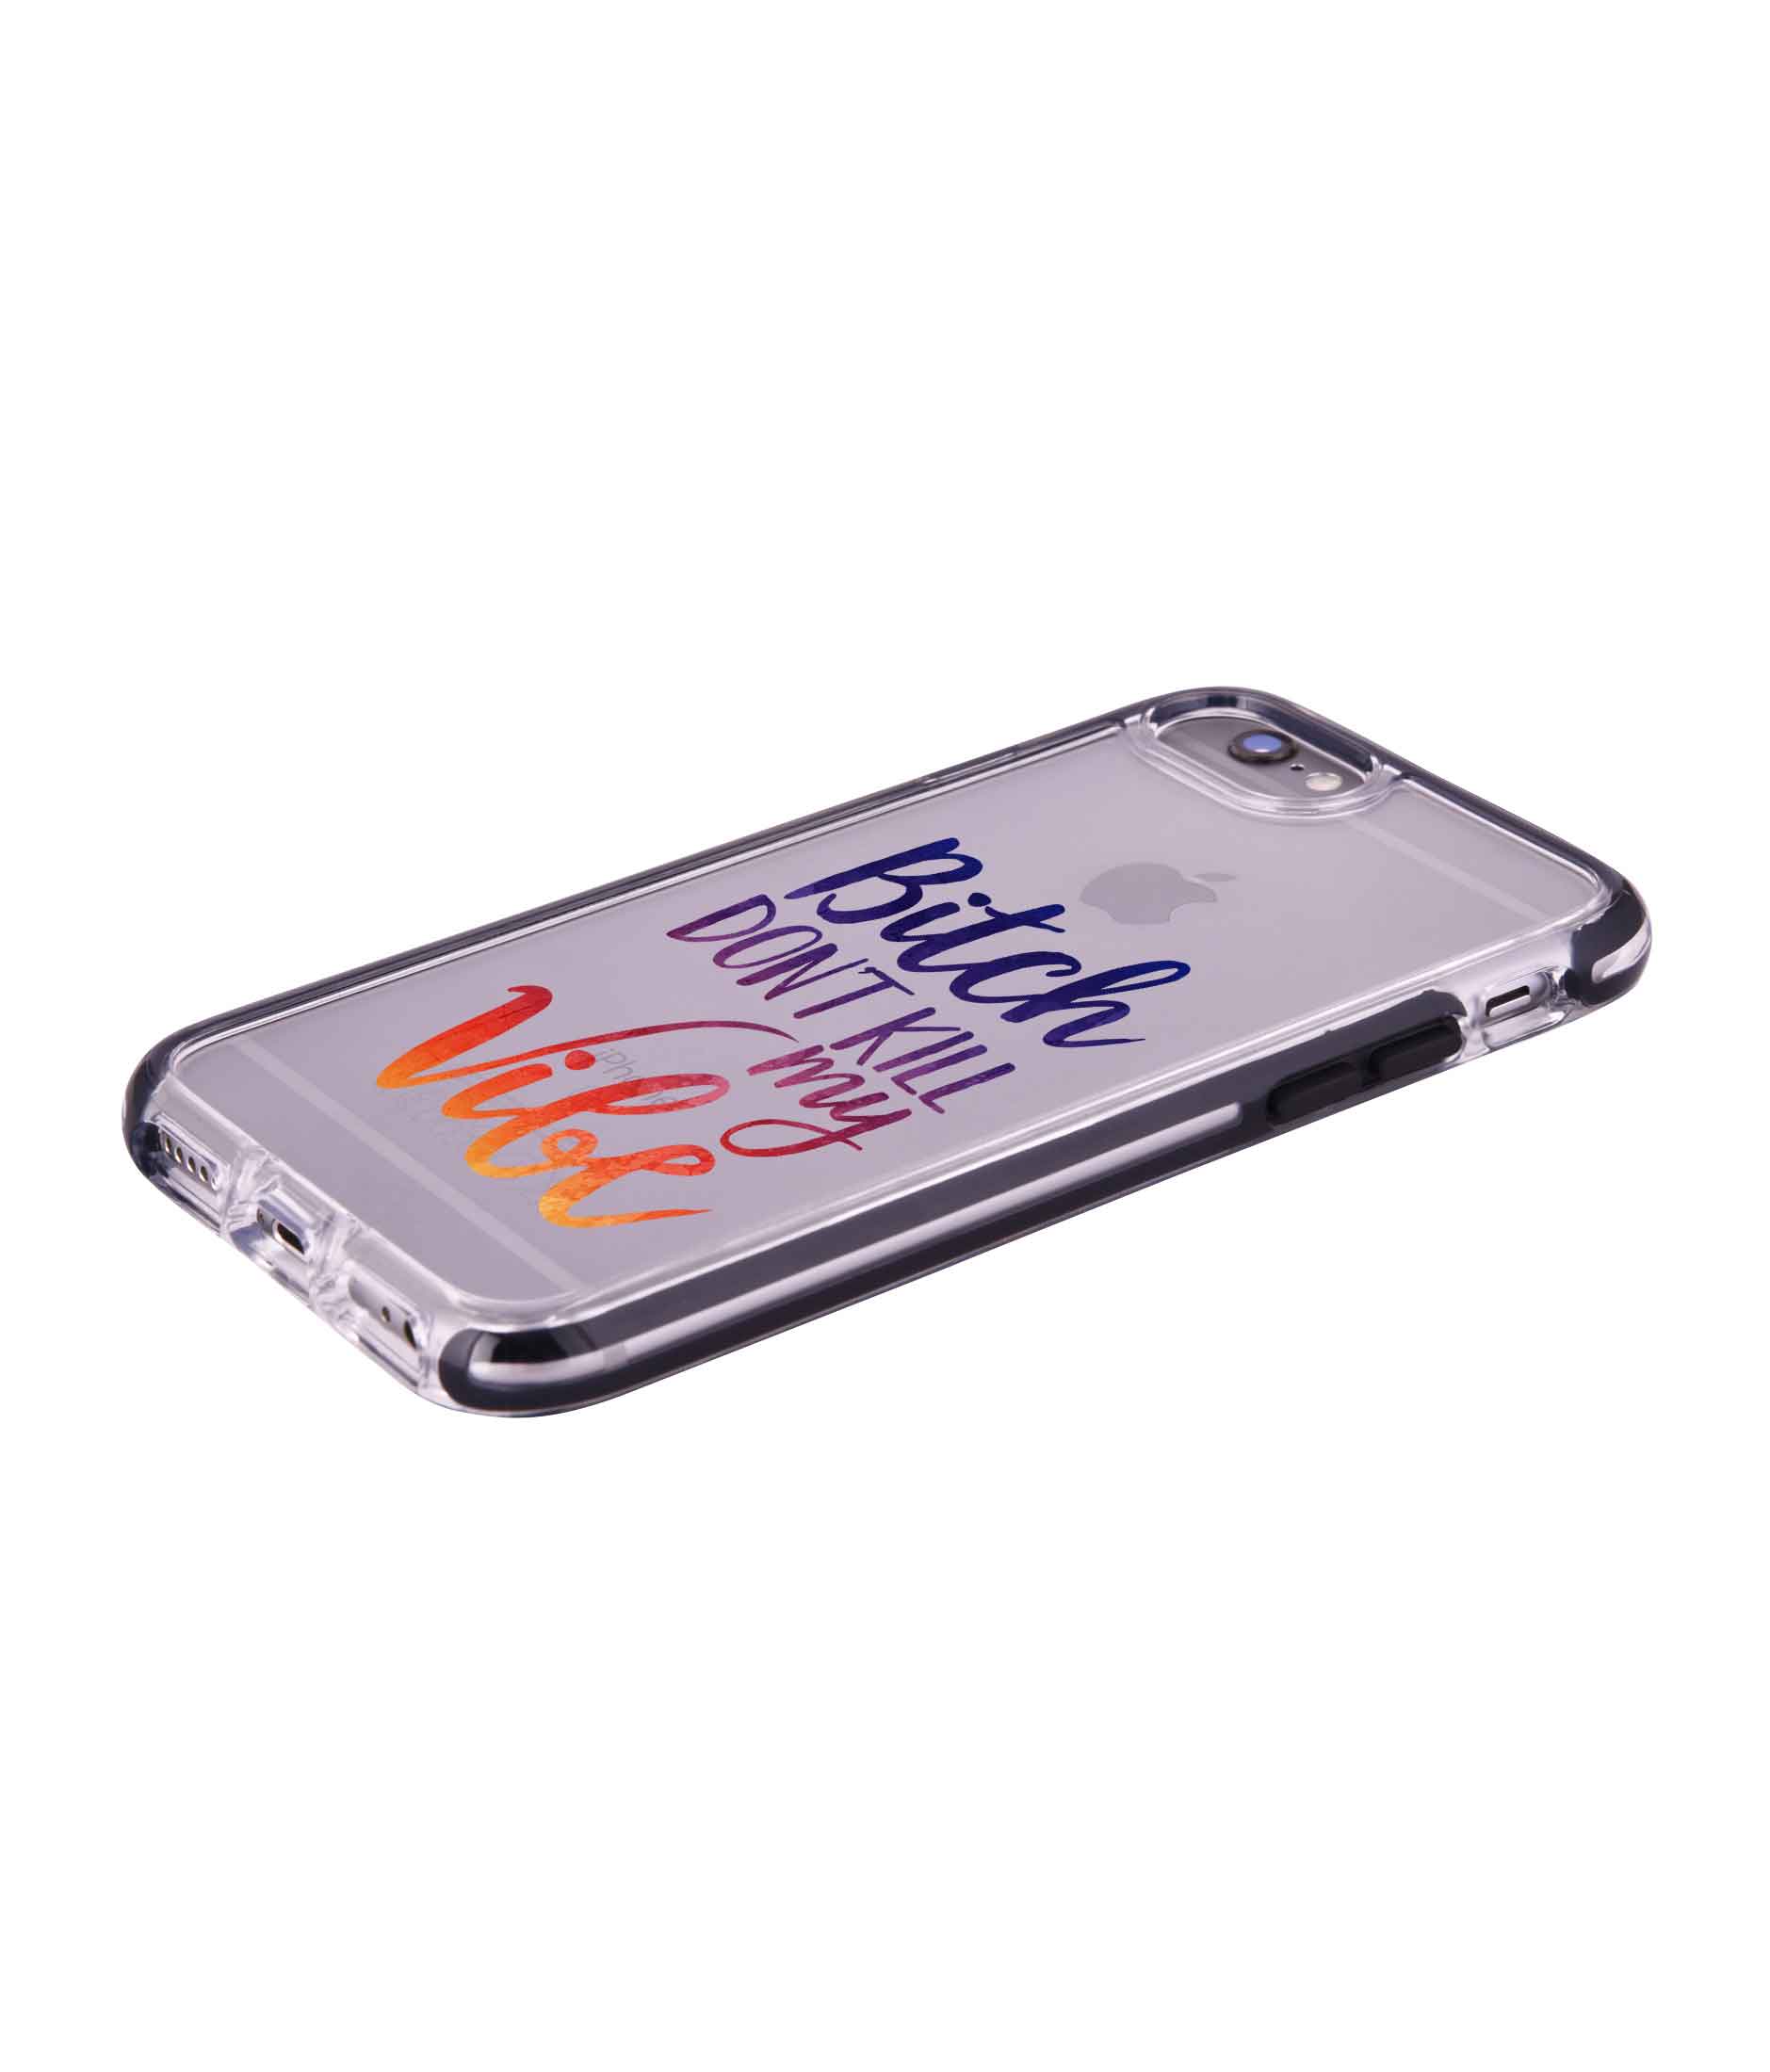 Dont kill my Vibe - Extreme Phone Case for iPhone 6